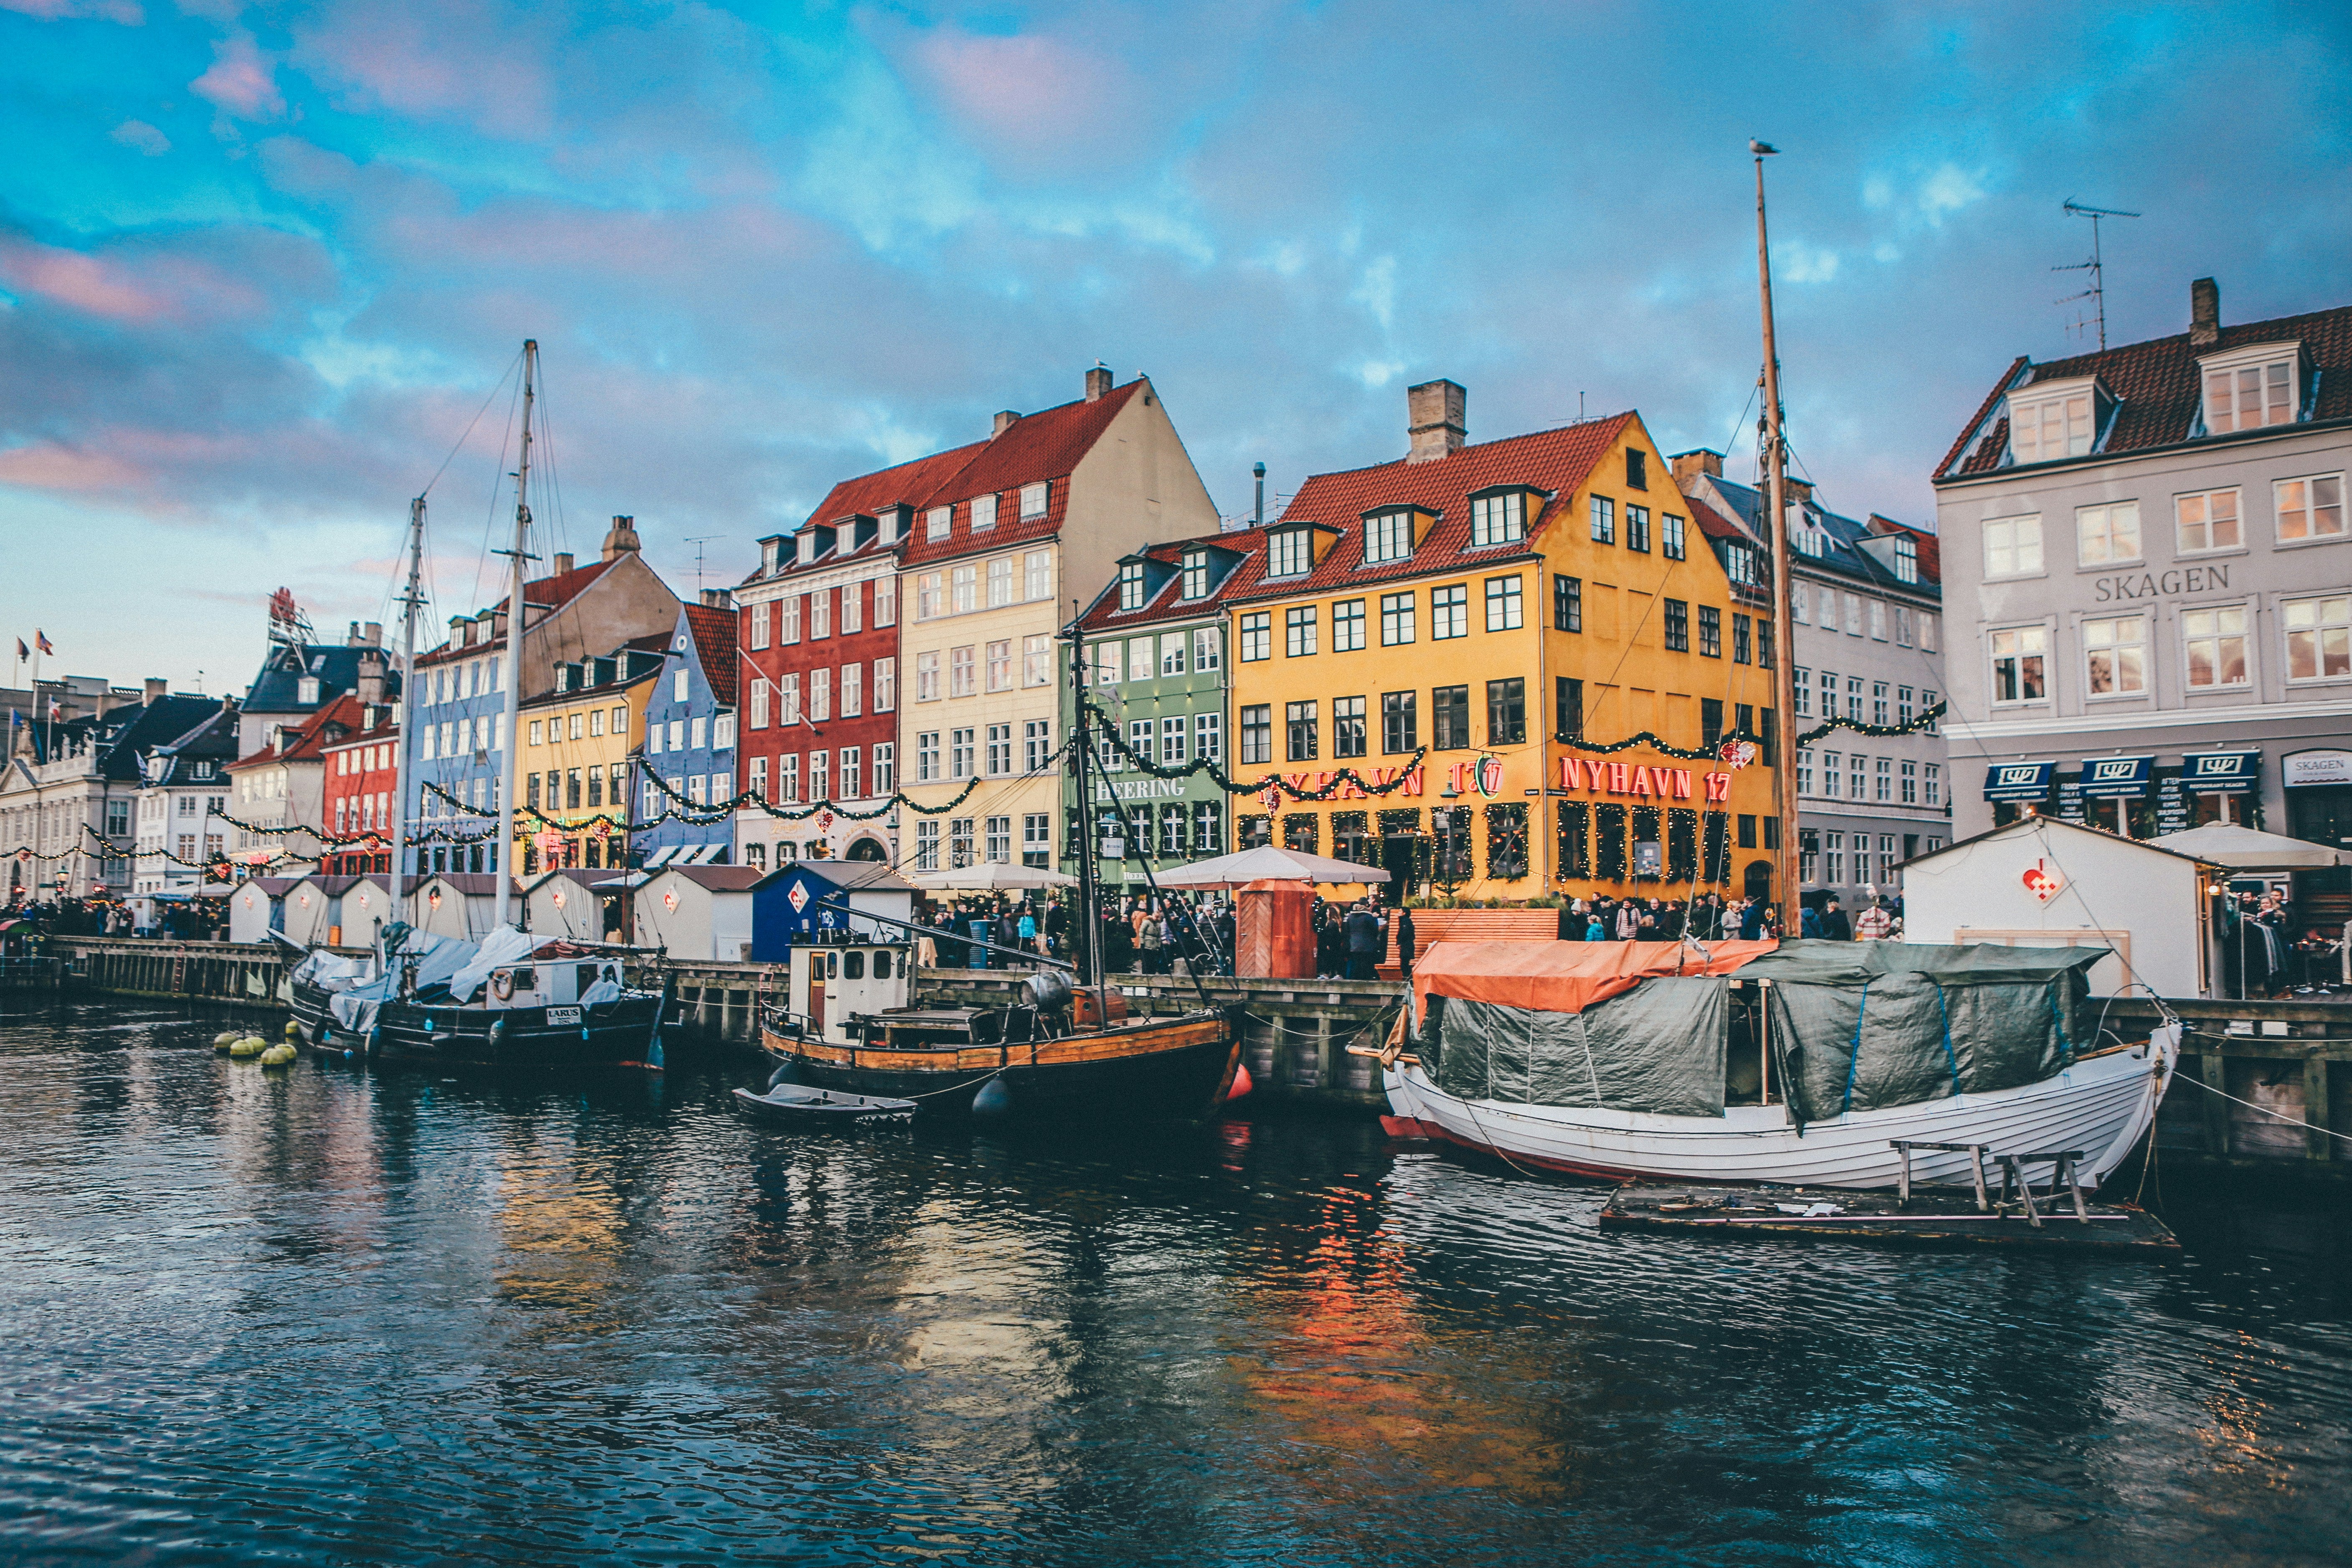 Denmark is one of the top LGBT-friendly destinations in Europe